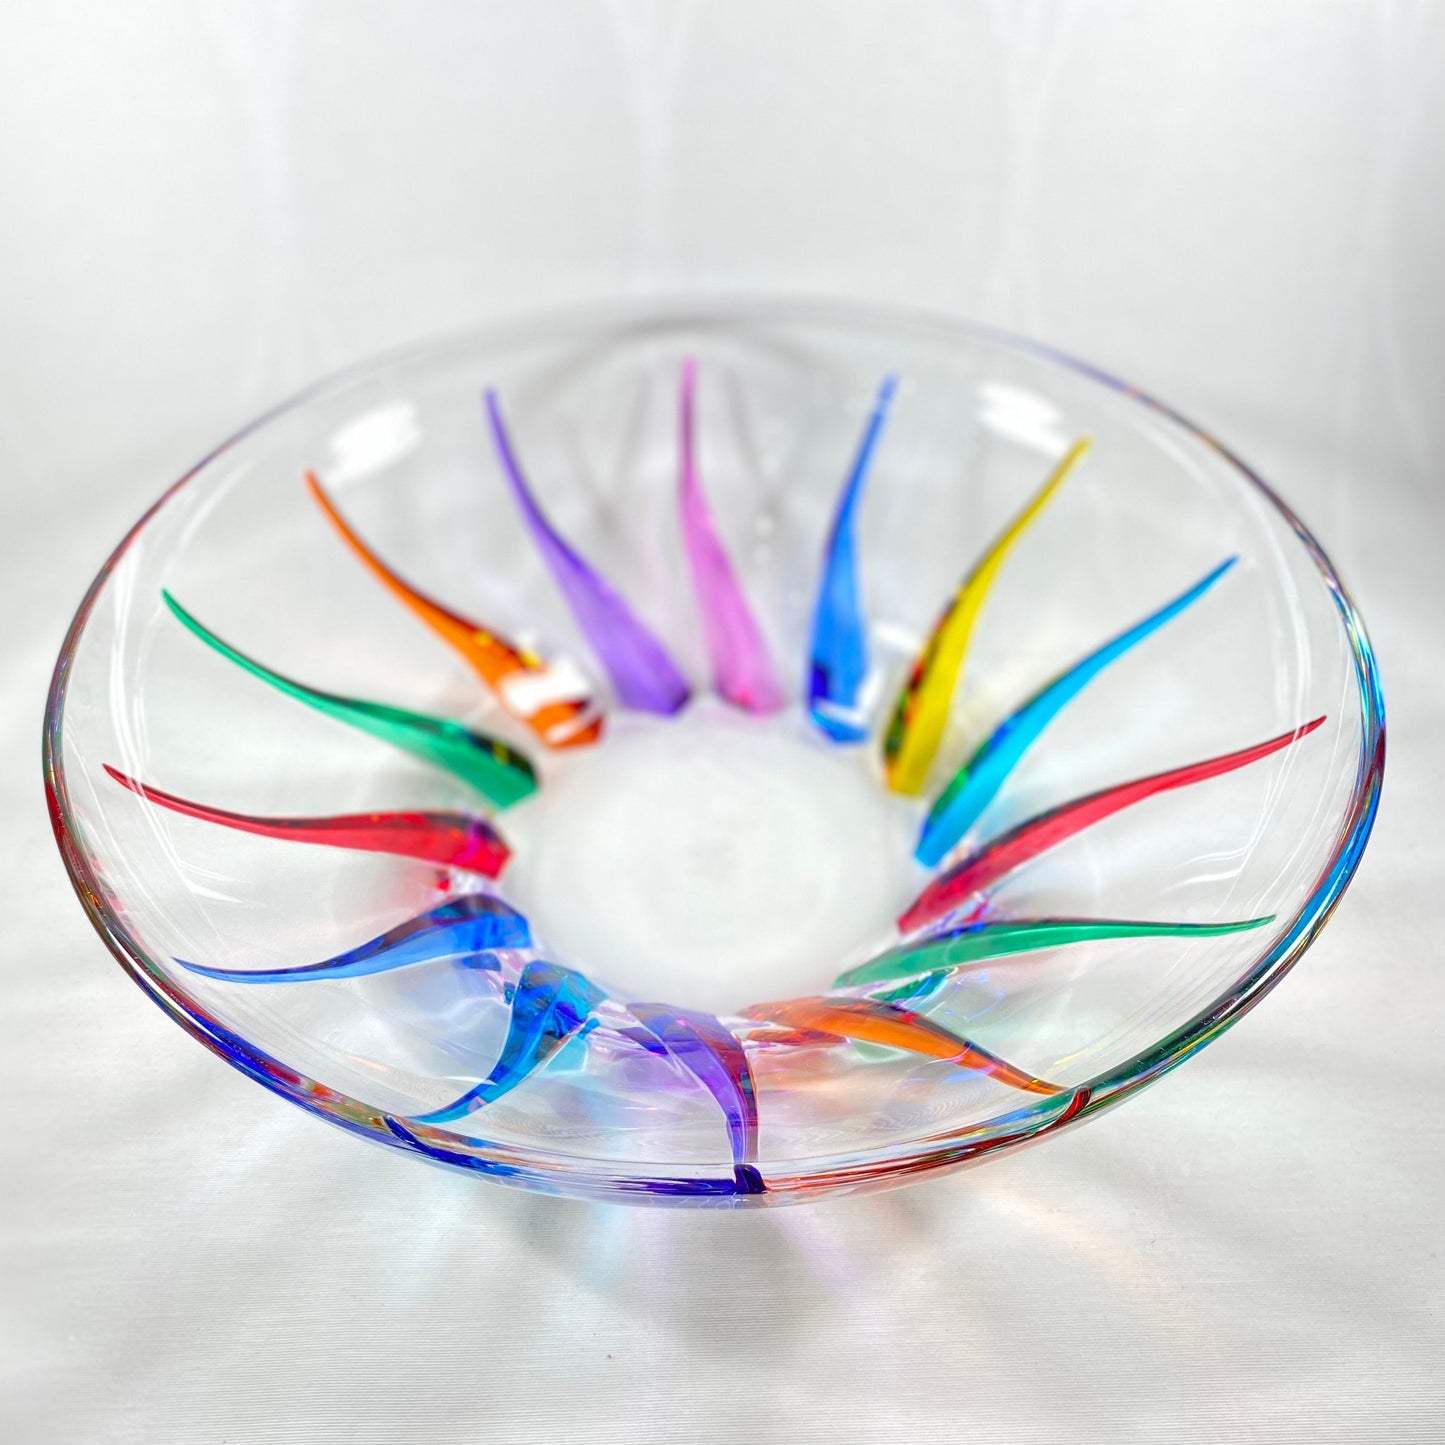 Venetian Glass Centerpiece Bowl - Handmade in Italy, Colorful Murano Glass Plate